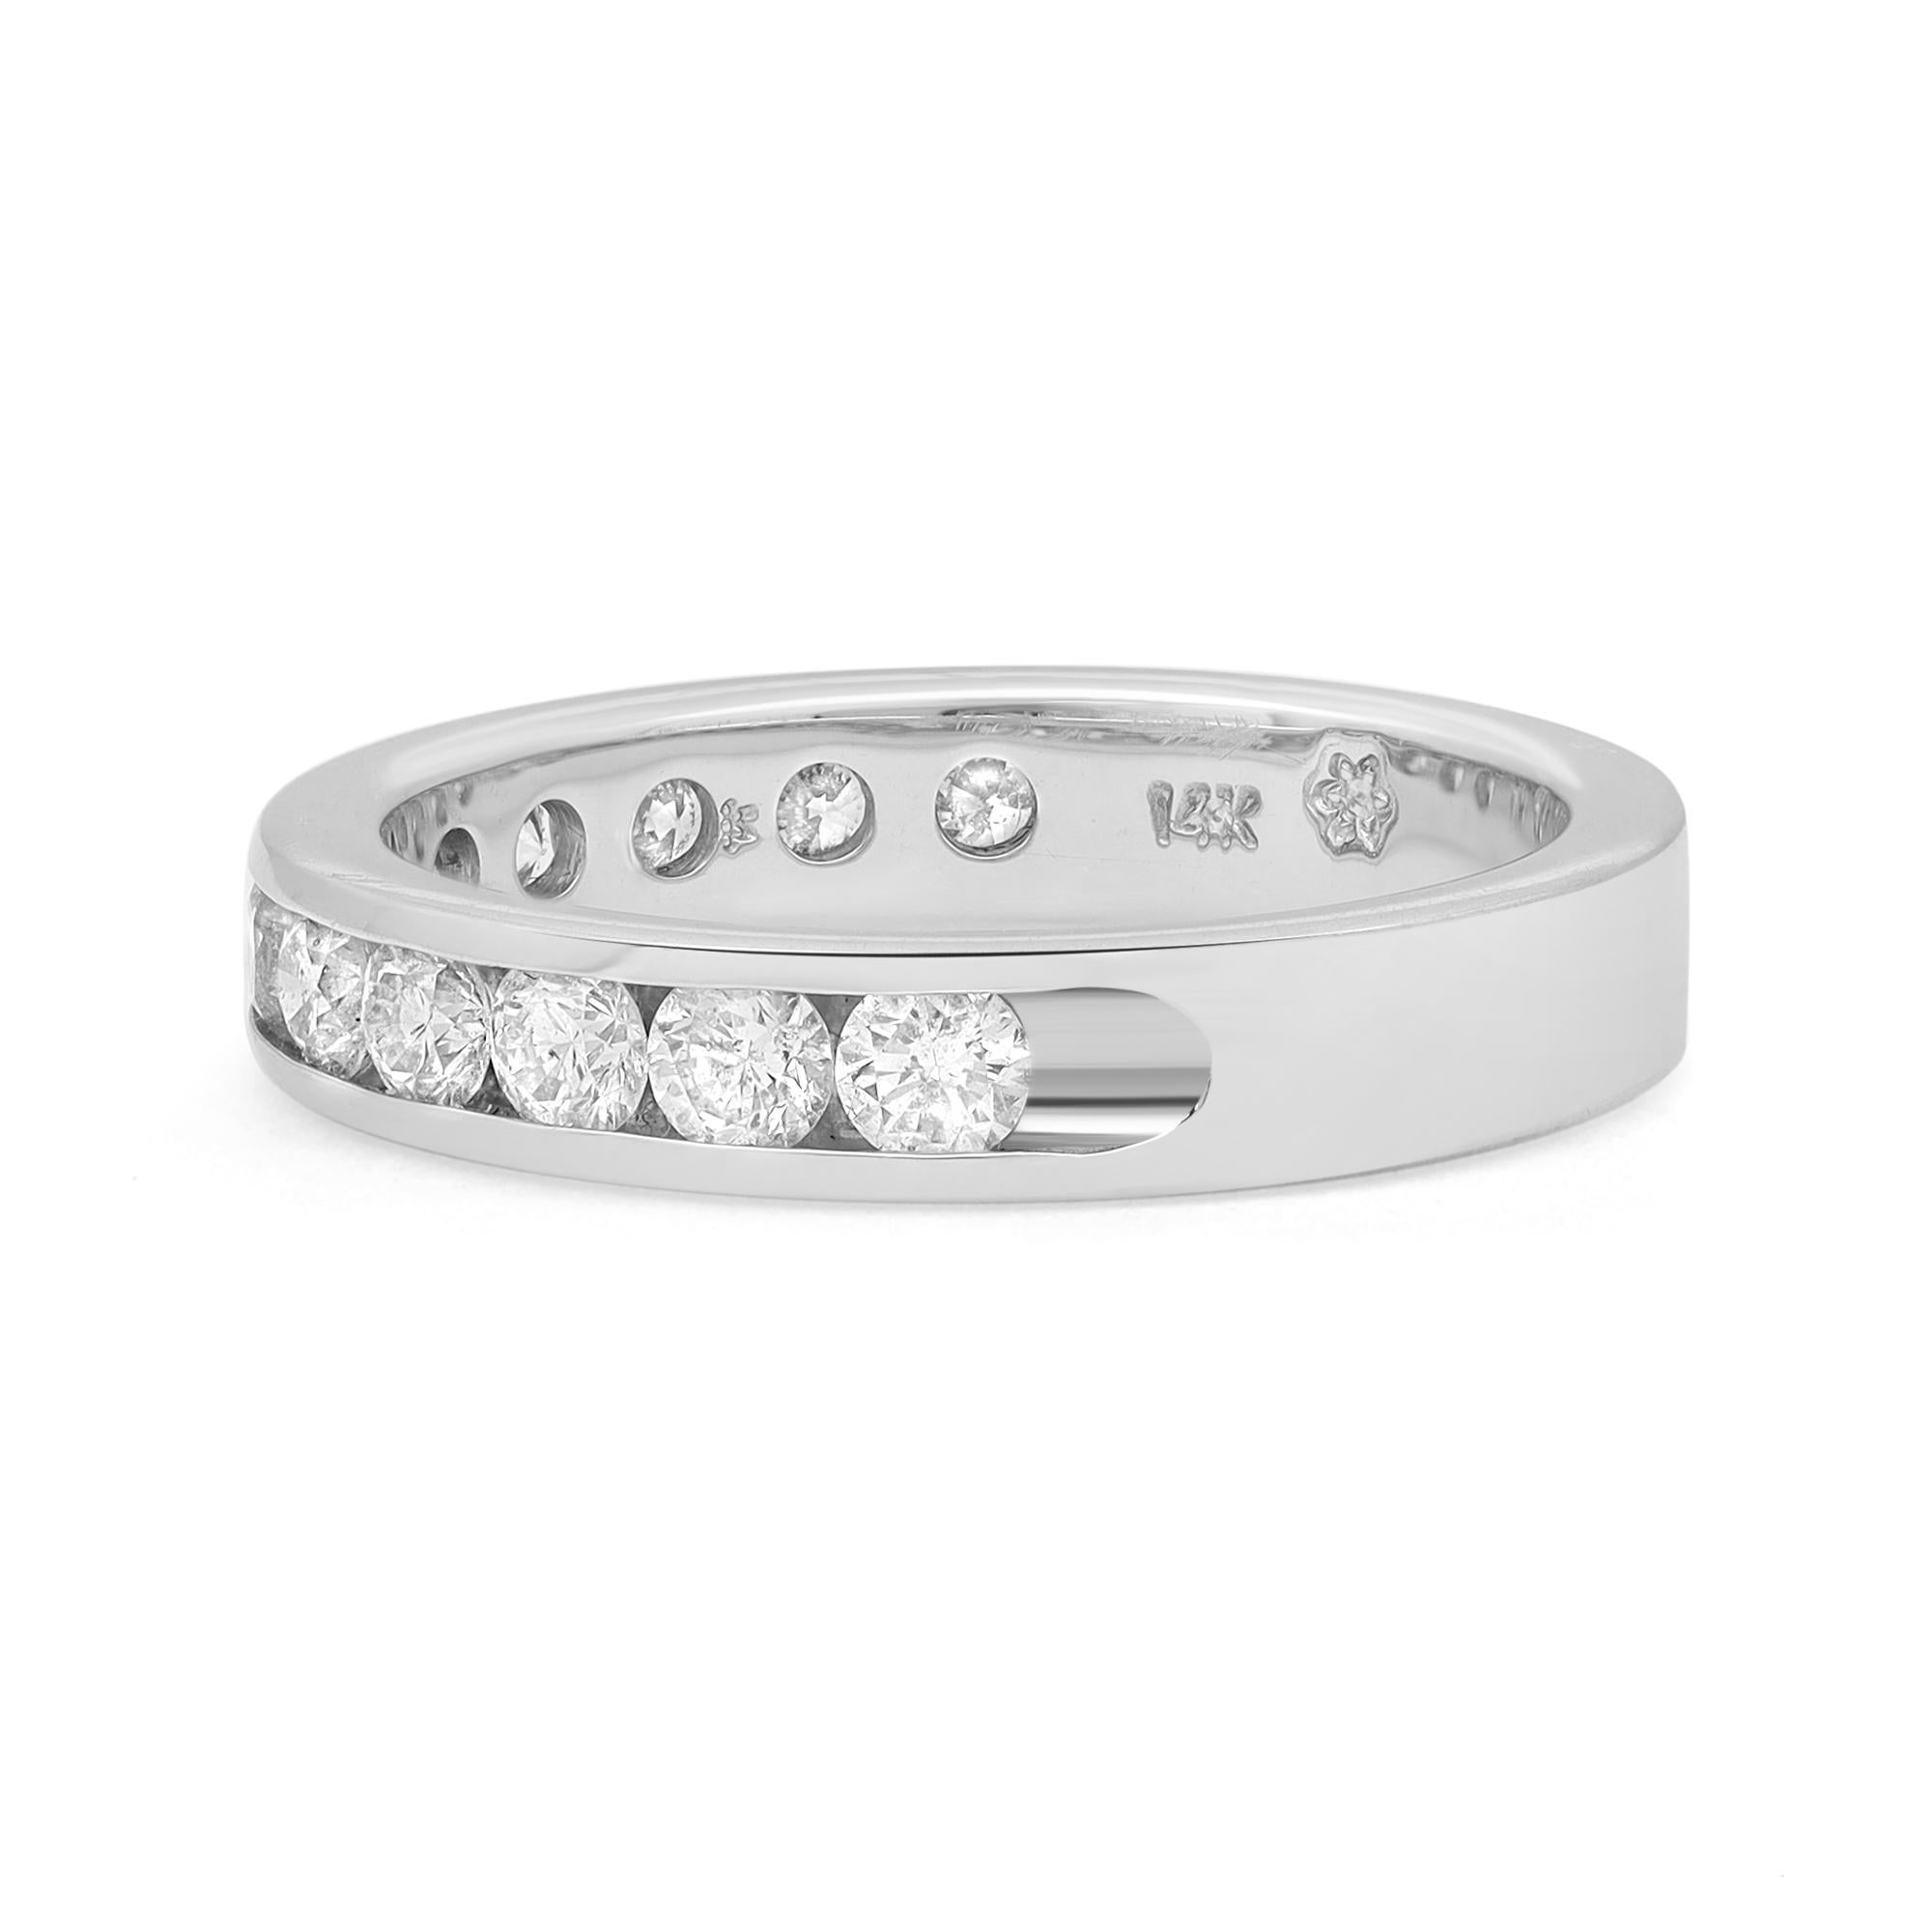 Timeless and stylish diamond wedding band ring. Crafted in fine 14K white gold. This ring features 12 dazzling round brilliant cut diamonds in channel setting. Perfect for a gift or as a promise ring. Total diamond weight: 0.85 carat. Diamond color